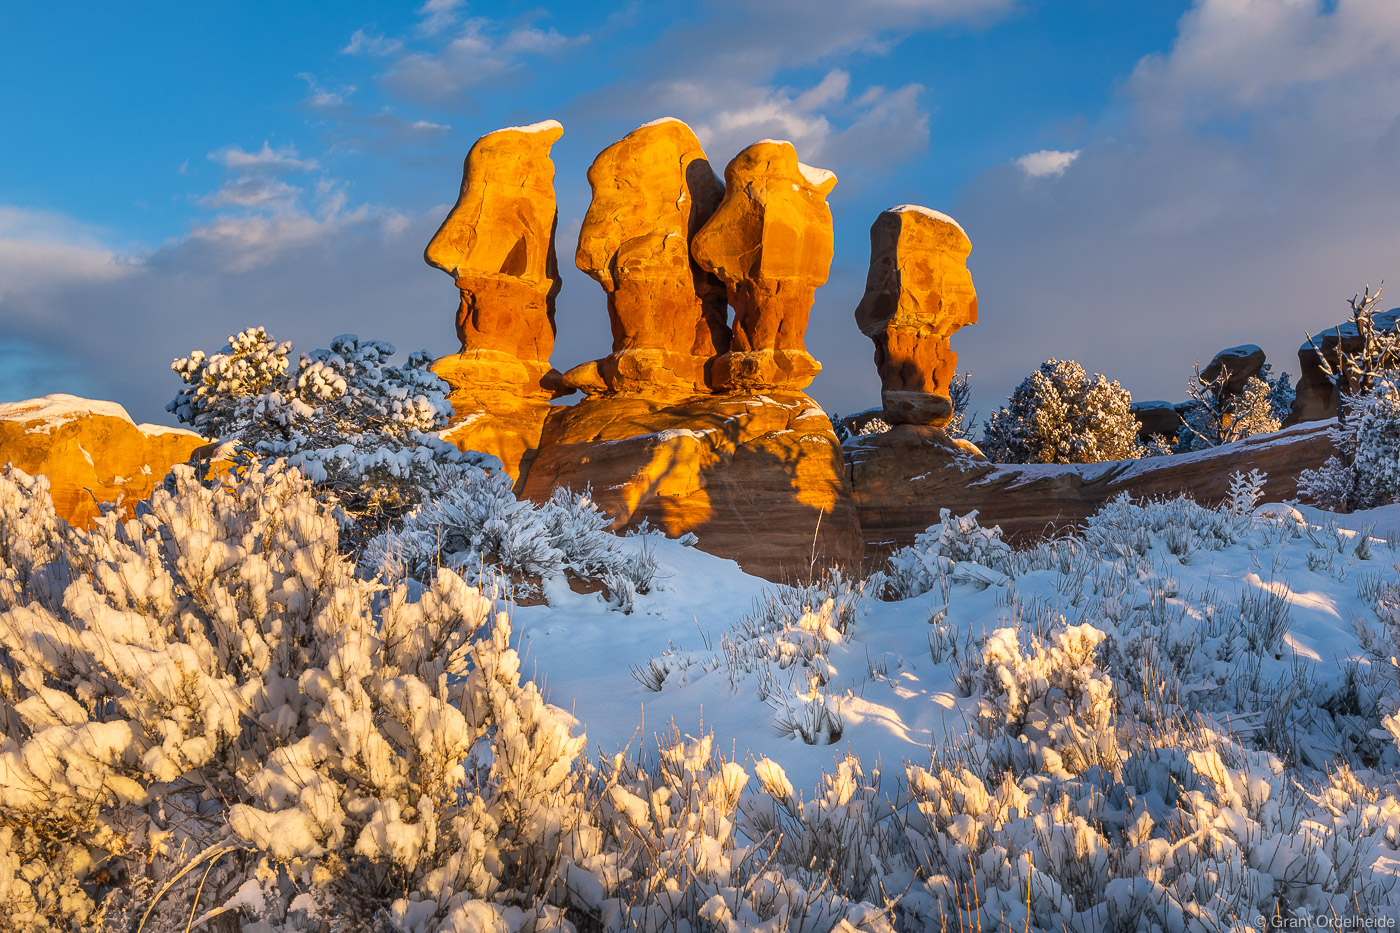 Fresh snow on The Devils Garden in Utah's Grand Staircase-Escalante National Monument